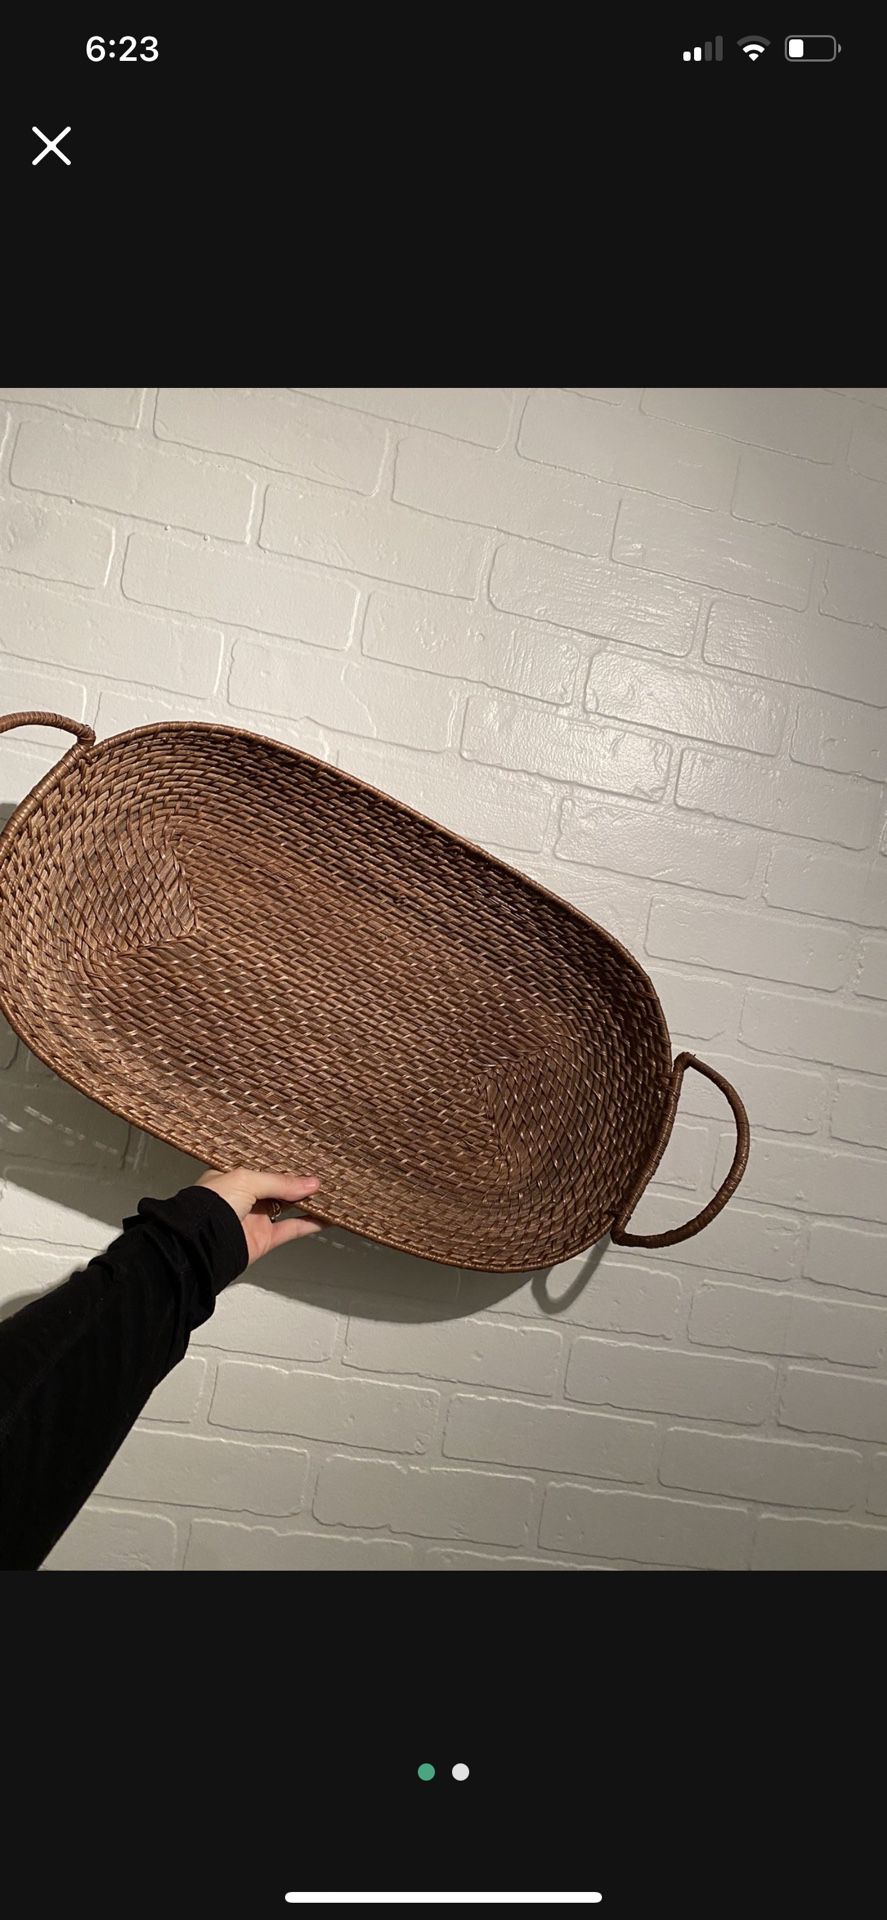 Gorgeous Decorative Wicker Threshold New Tray  Basket That Can Hang On Wall